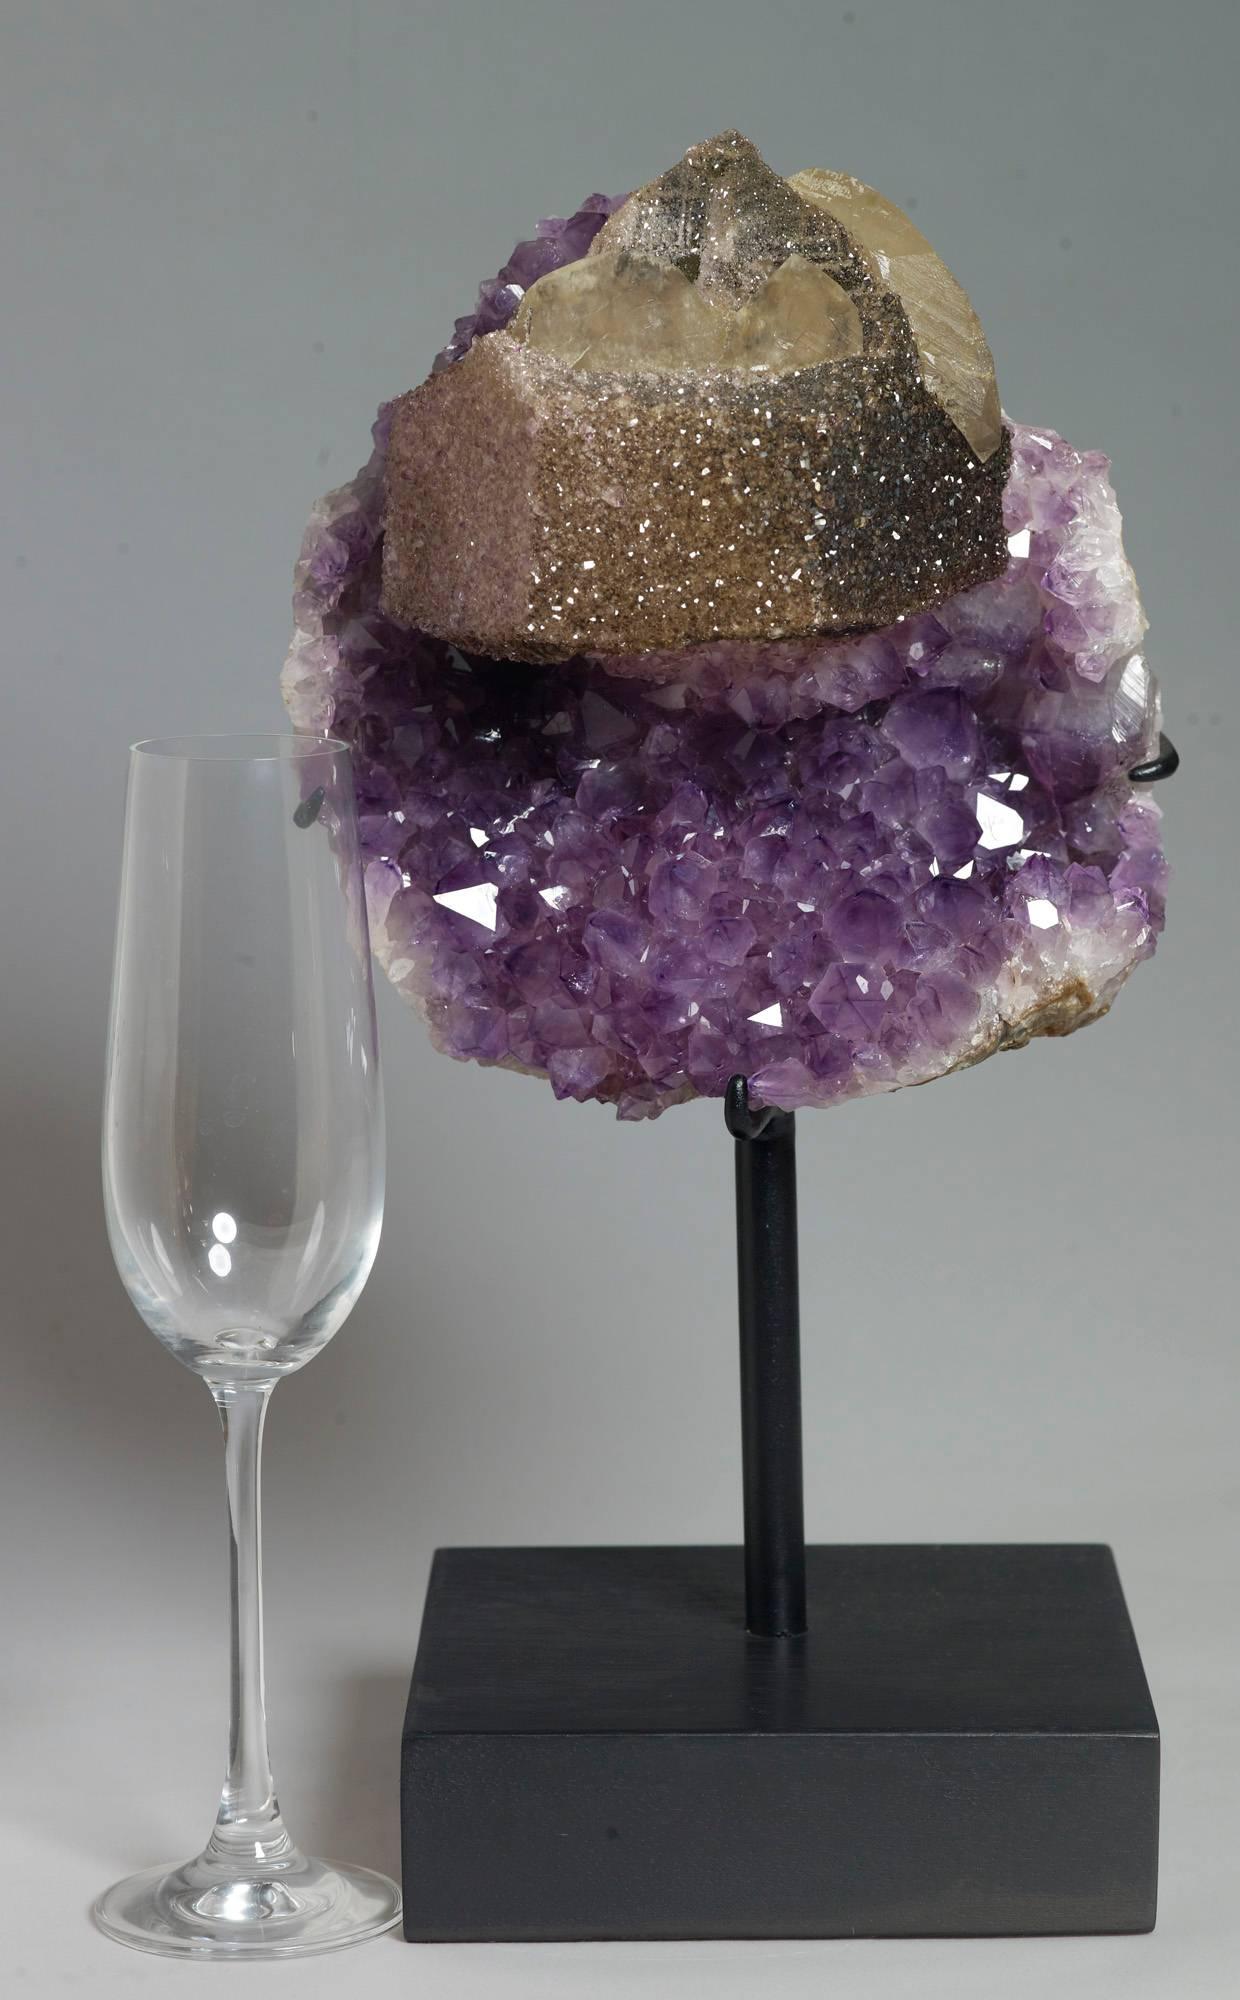 amethyst with calcite